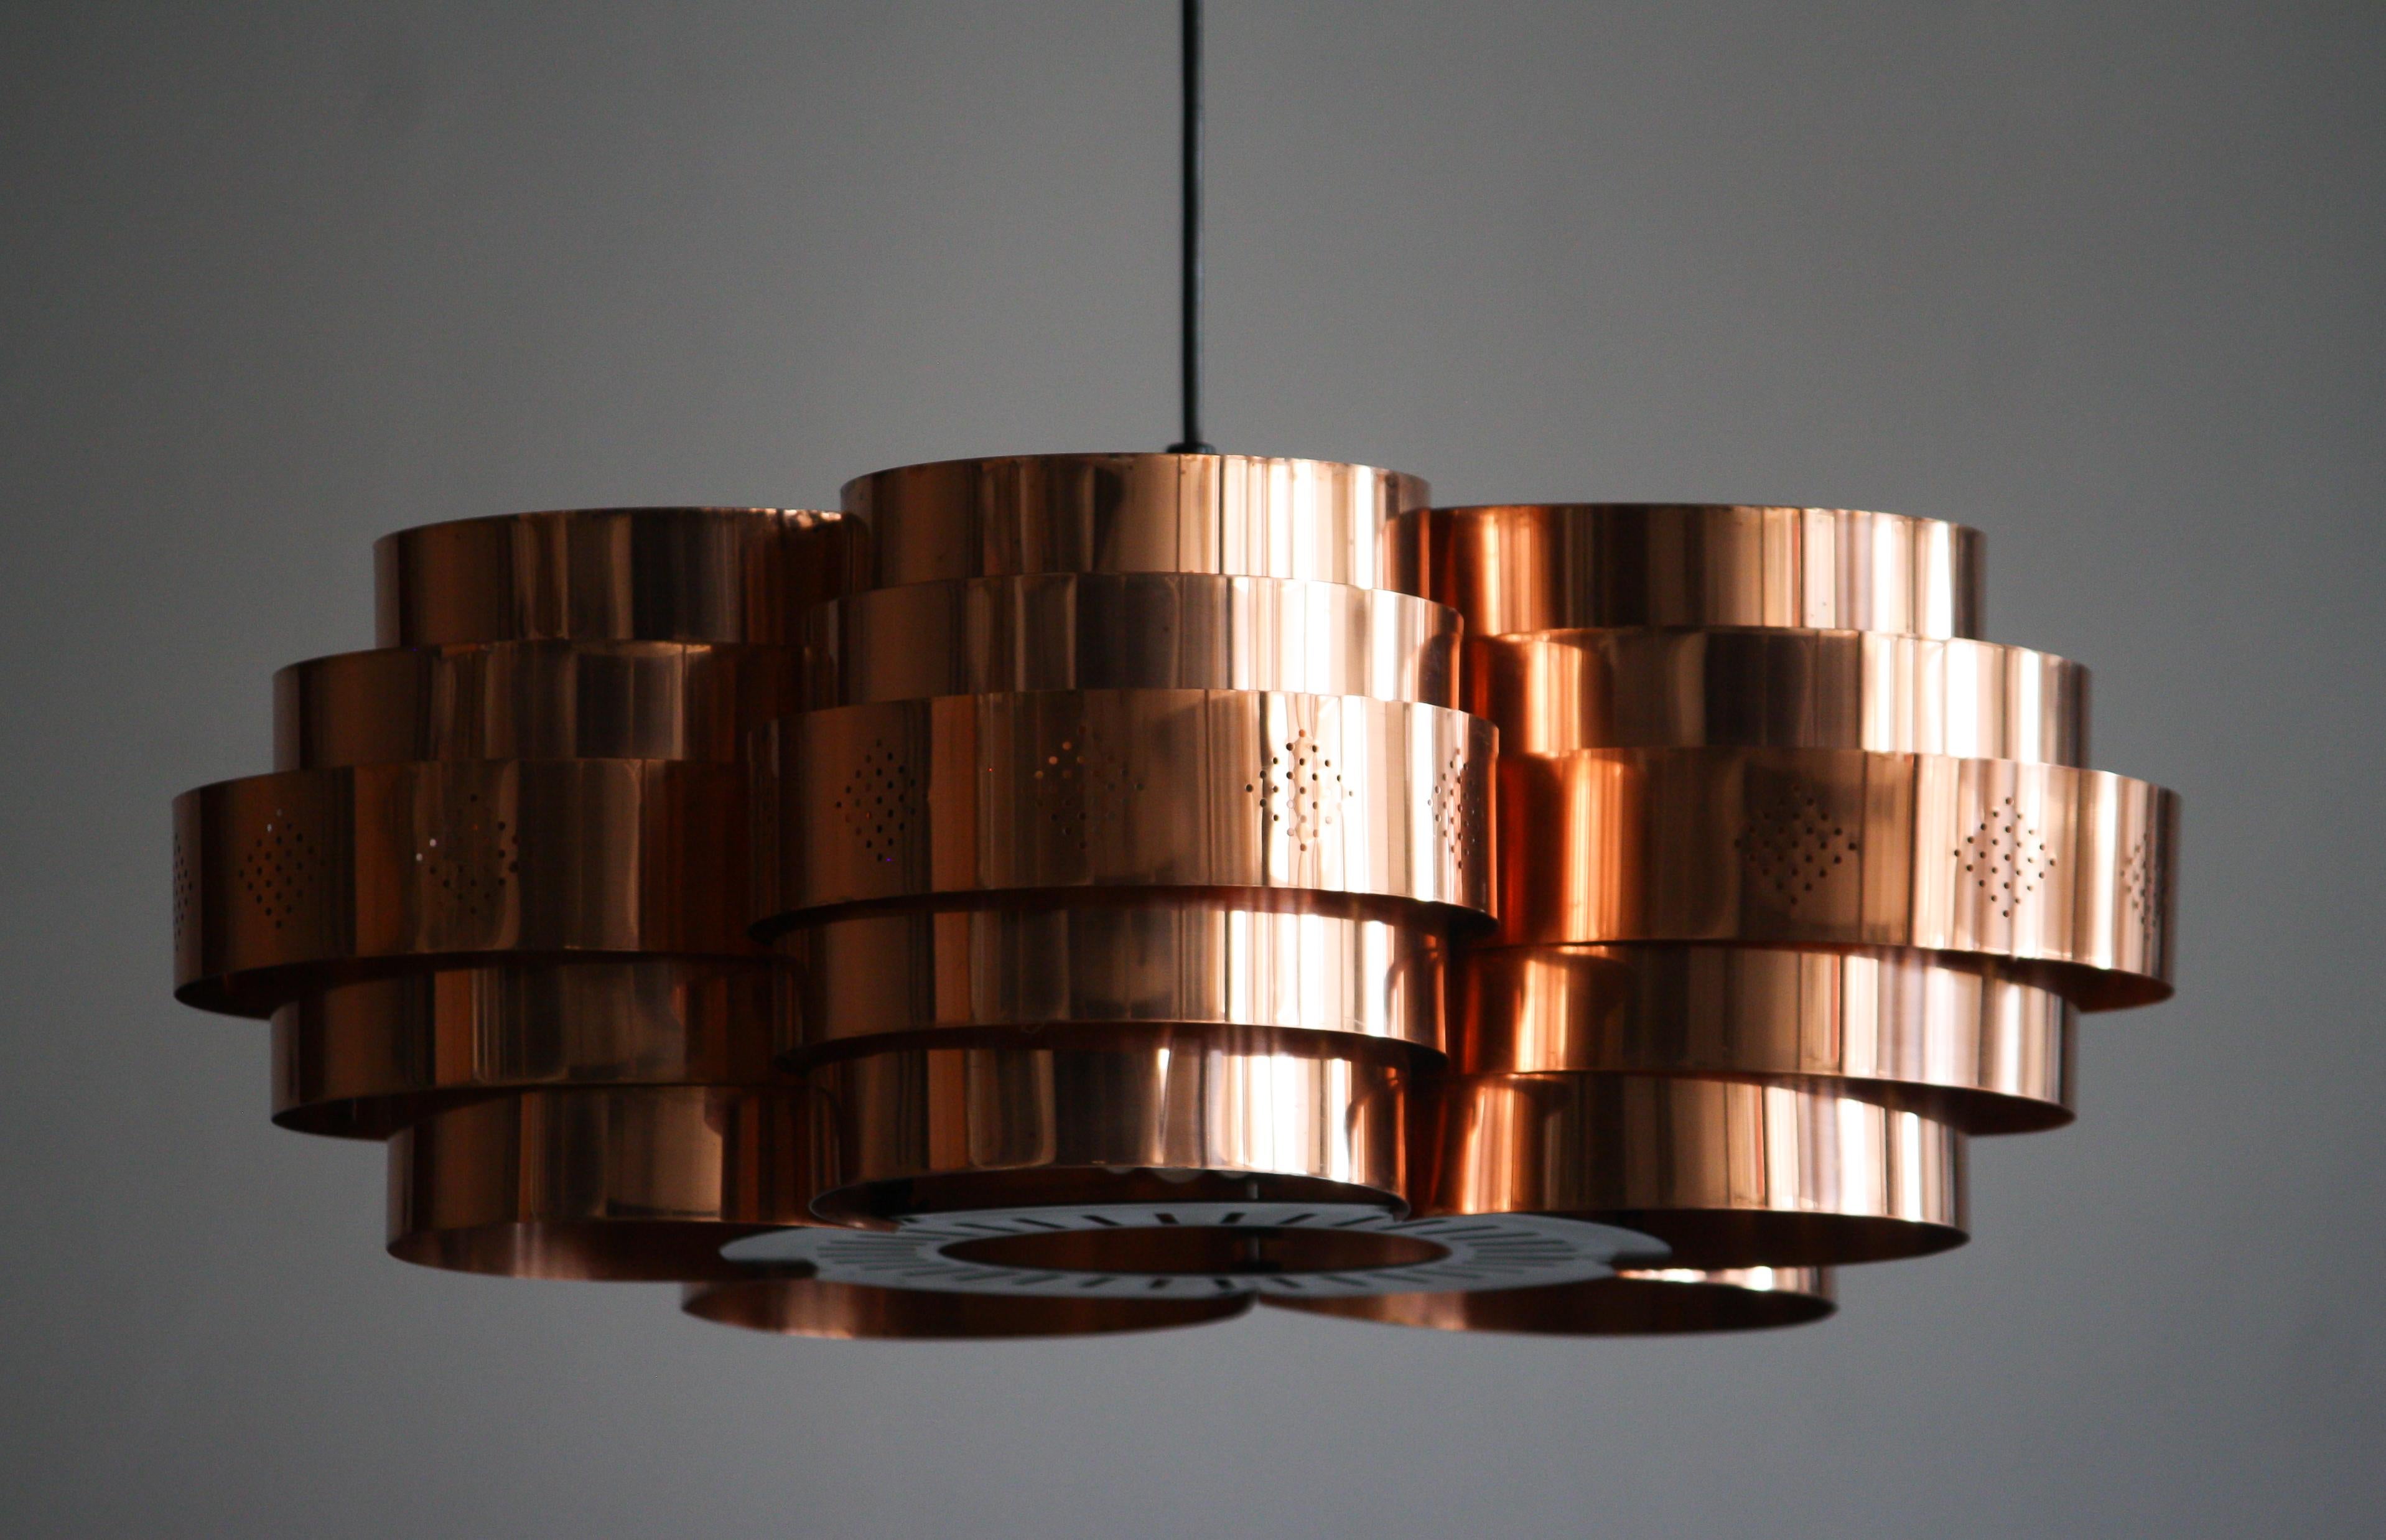 Beautiful copper pendant designed by Verner Schou and manufactured by Coronell Elektro, Denmark.
The lamp has a fabulous four-leaf clover shape with five variable tiers with giving a warm diffused lighting.
Period 1960s.
Dimensions: H 19 cm, Ø 50